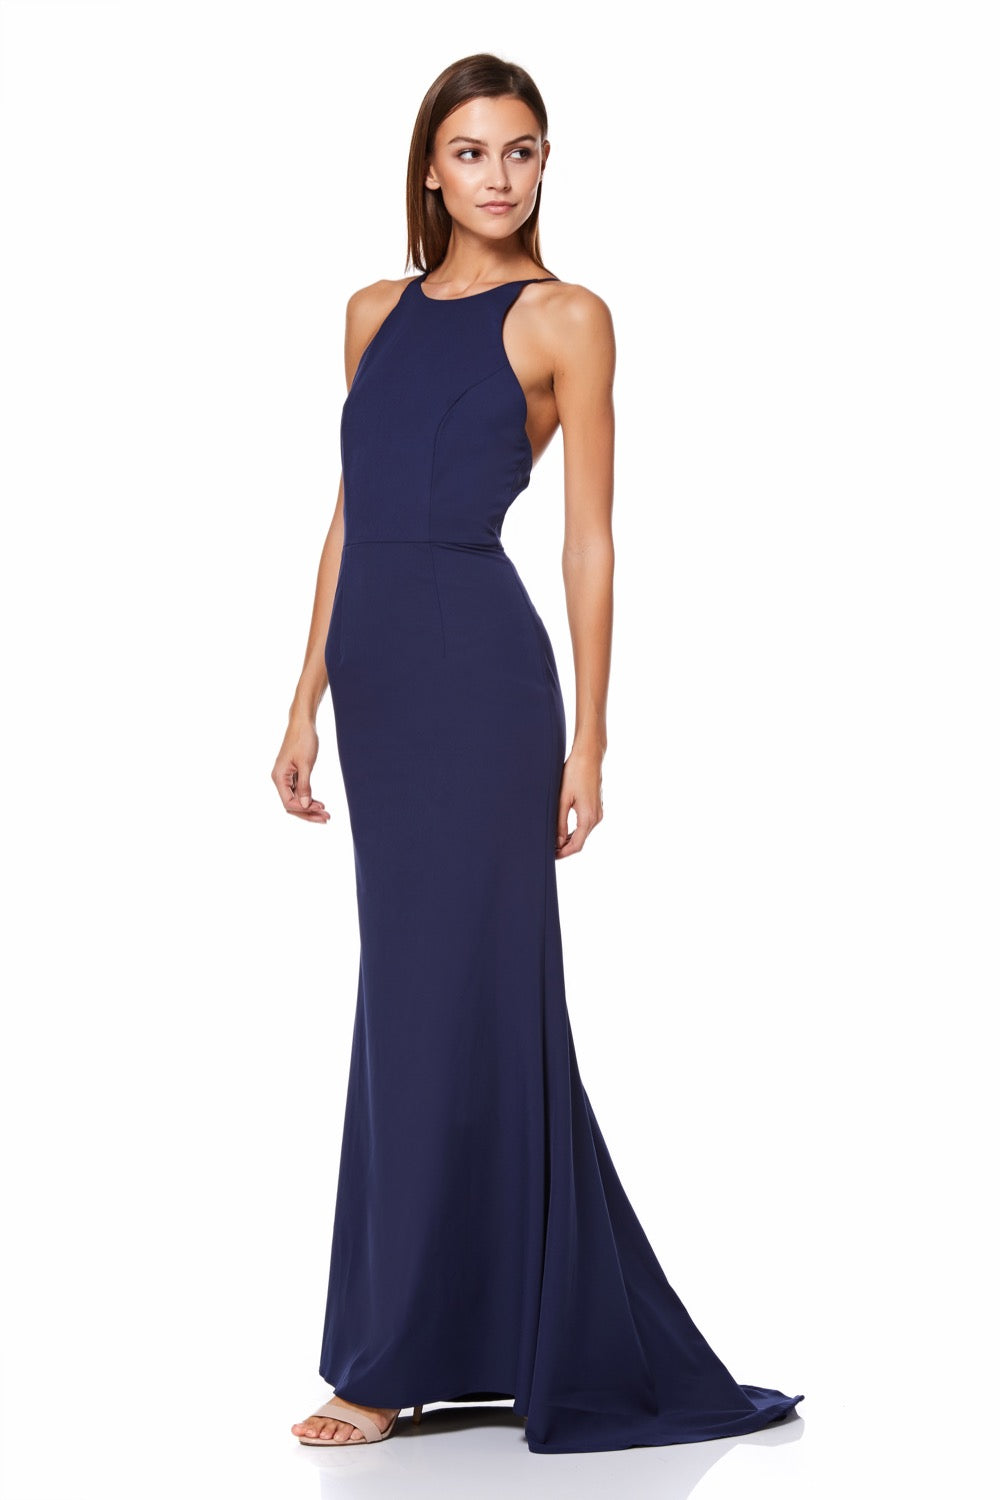 Jarlo Lyssa high neck fishtail navy maxi dress with strappy back detail